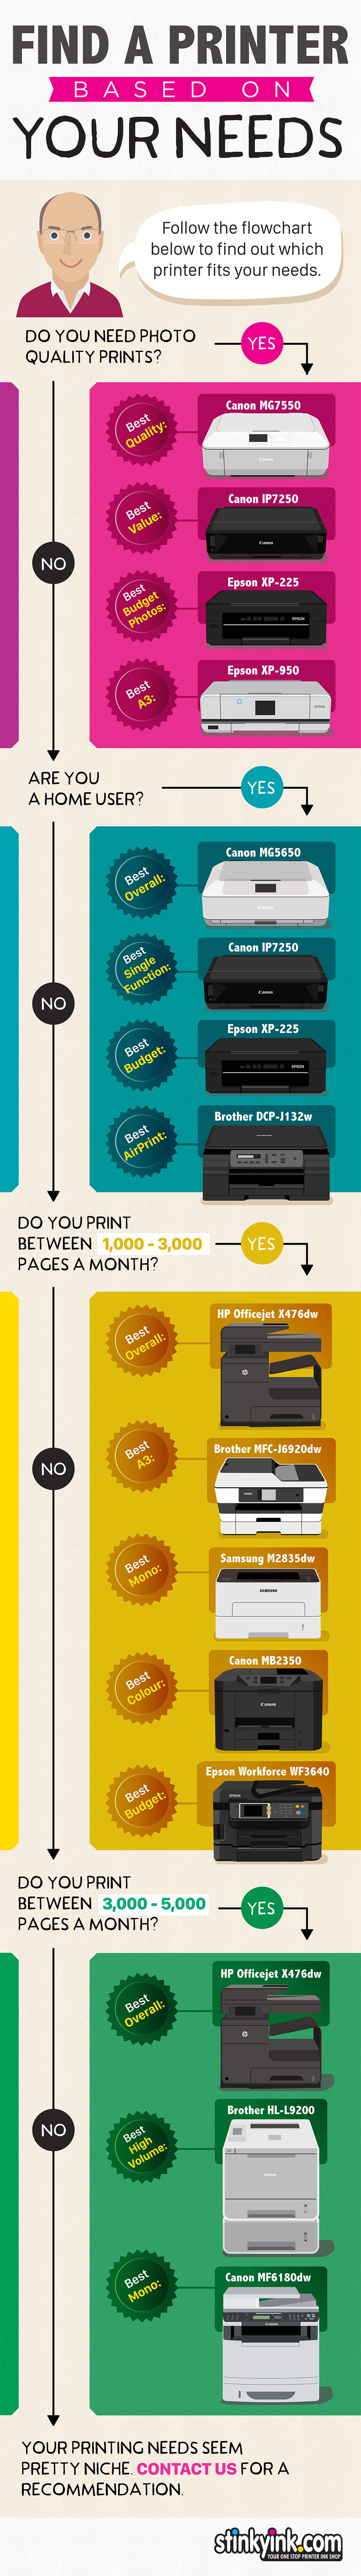 find-a-printer-based-on-your-needs-f0411f6bca5d9f18a8c963f9024e1d47